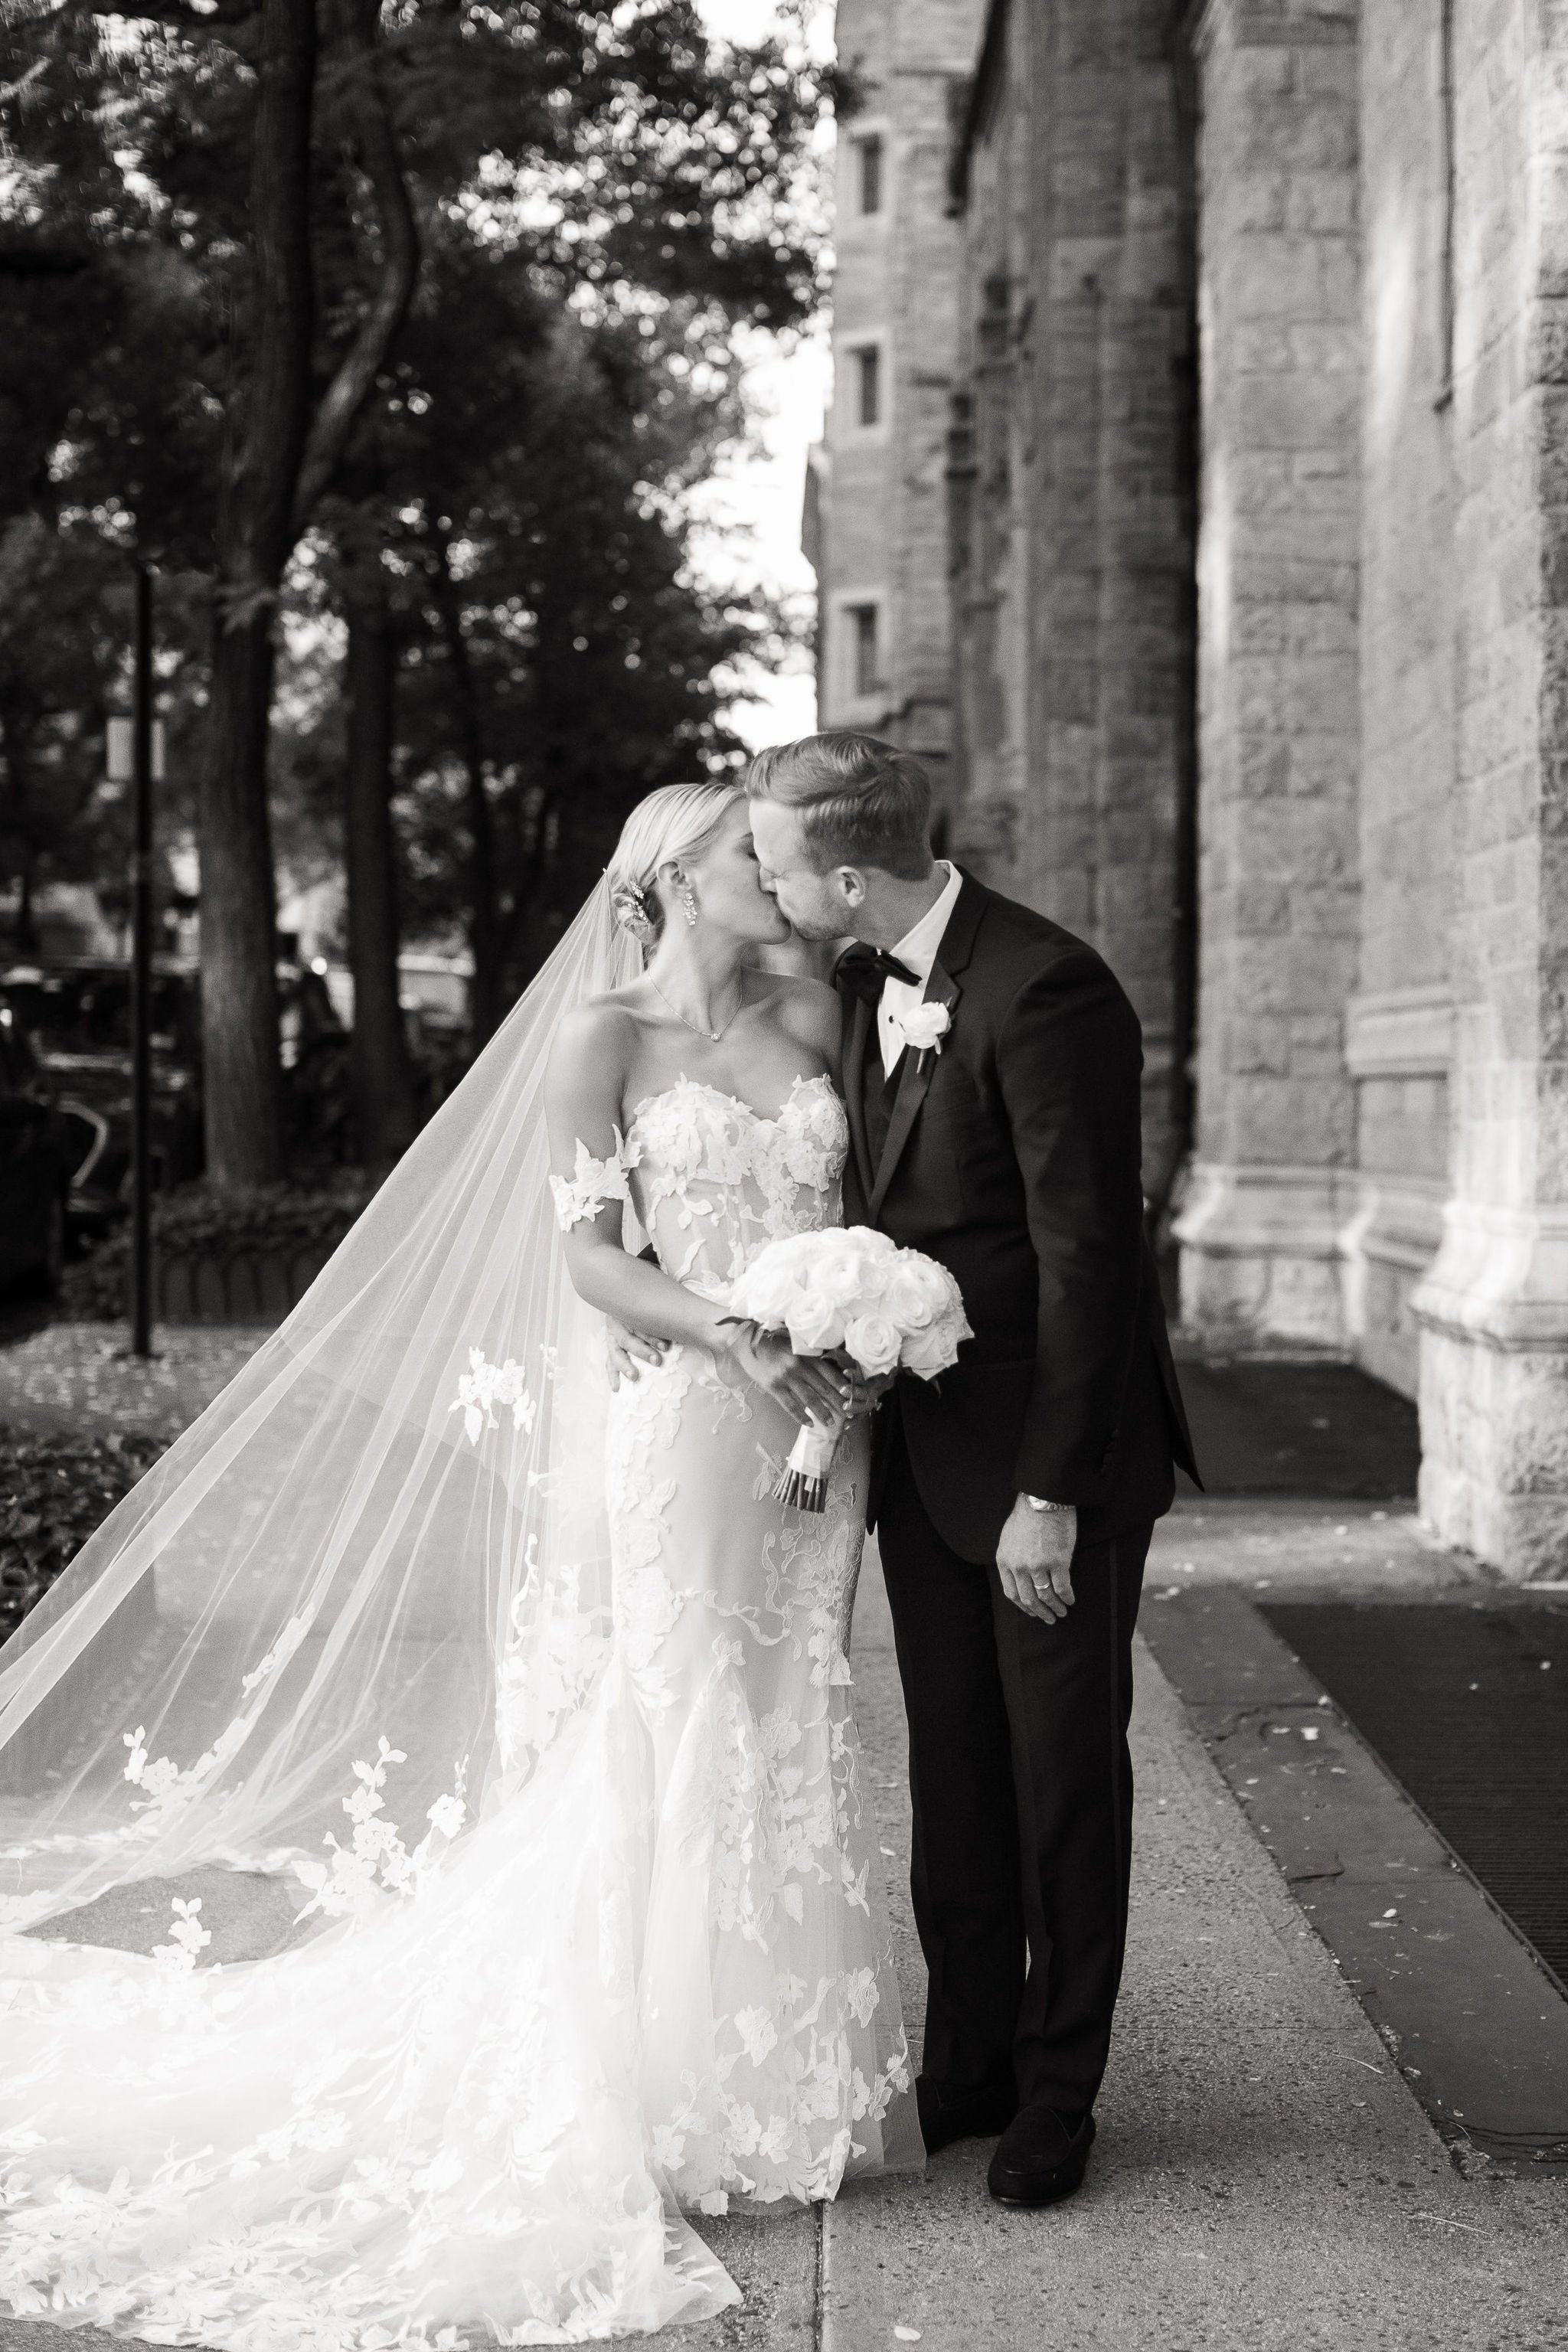  monique lhuillier willow dramatic veil NYC wedding 